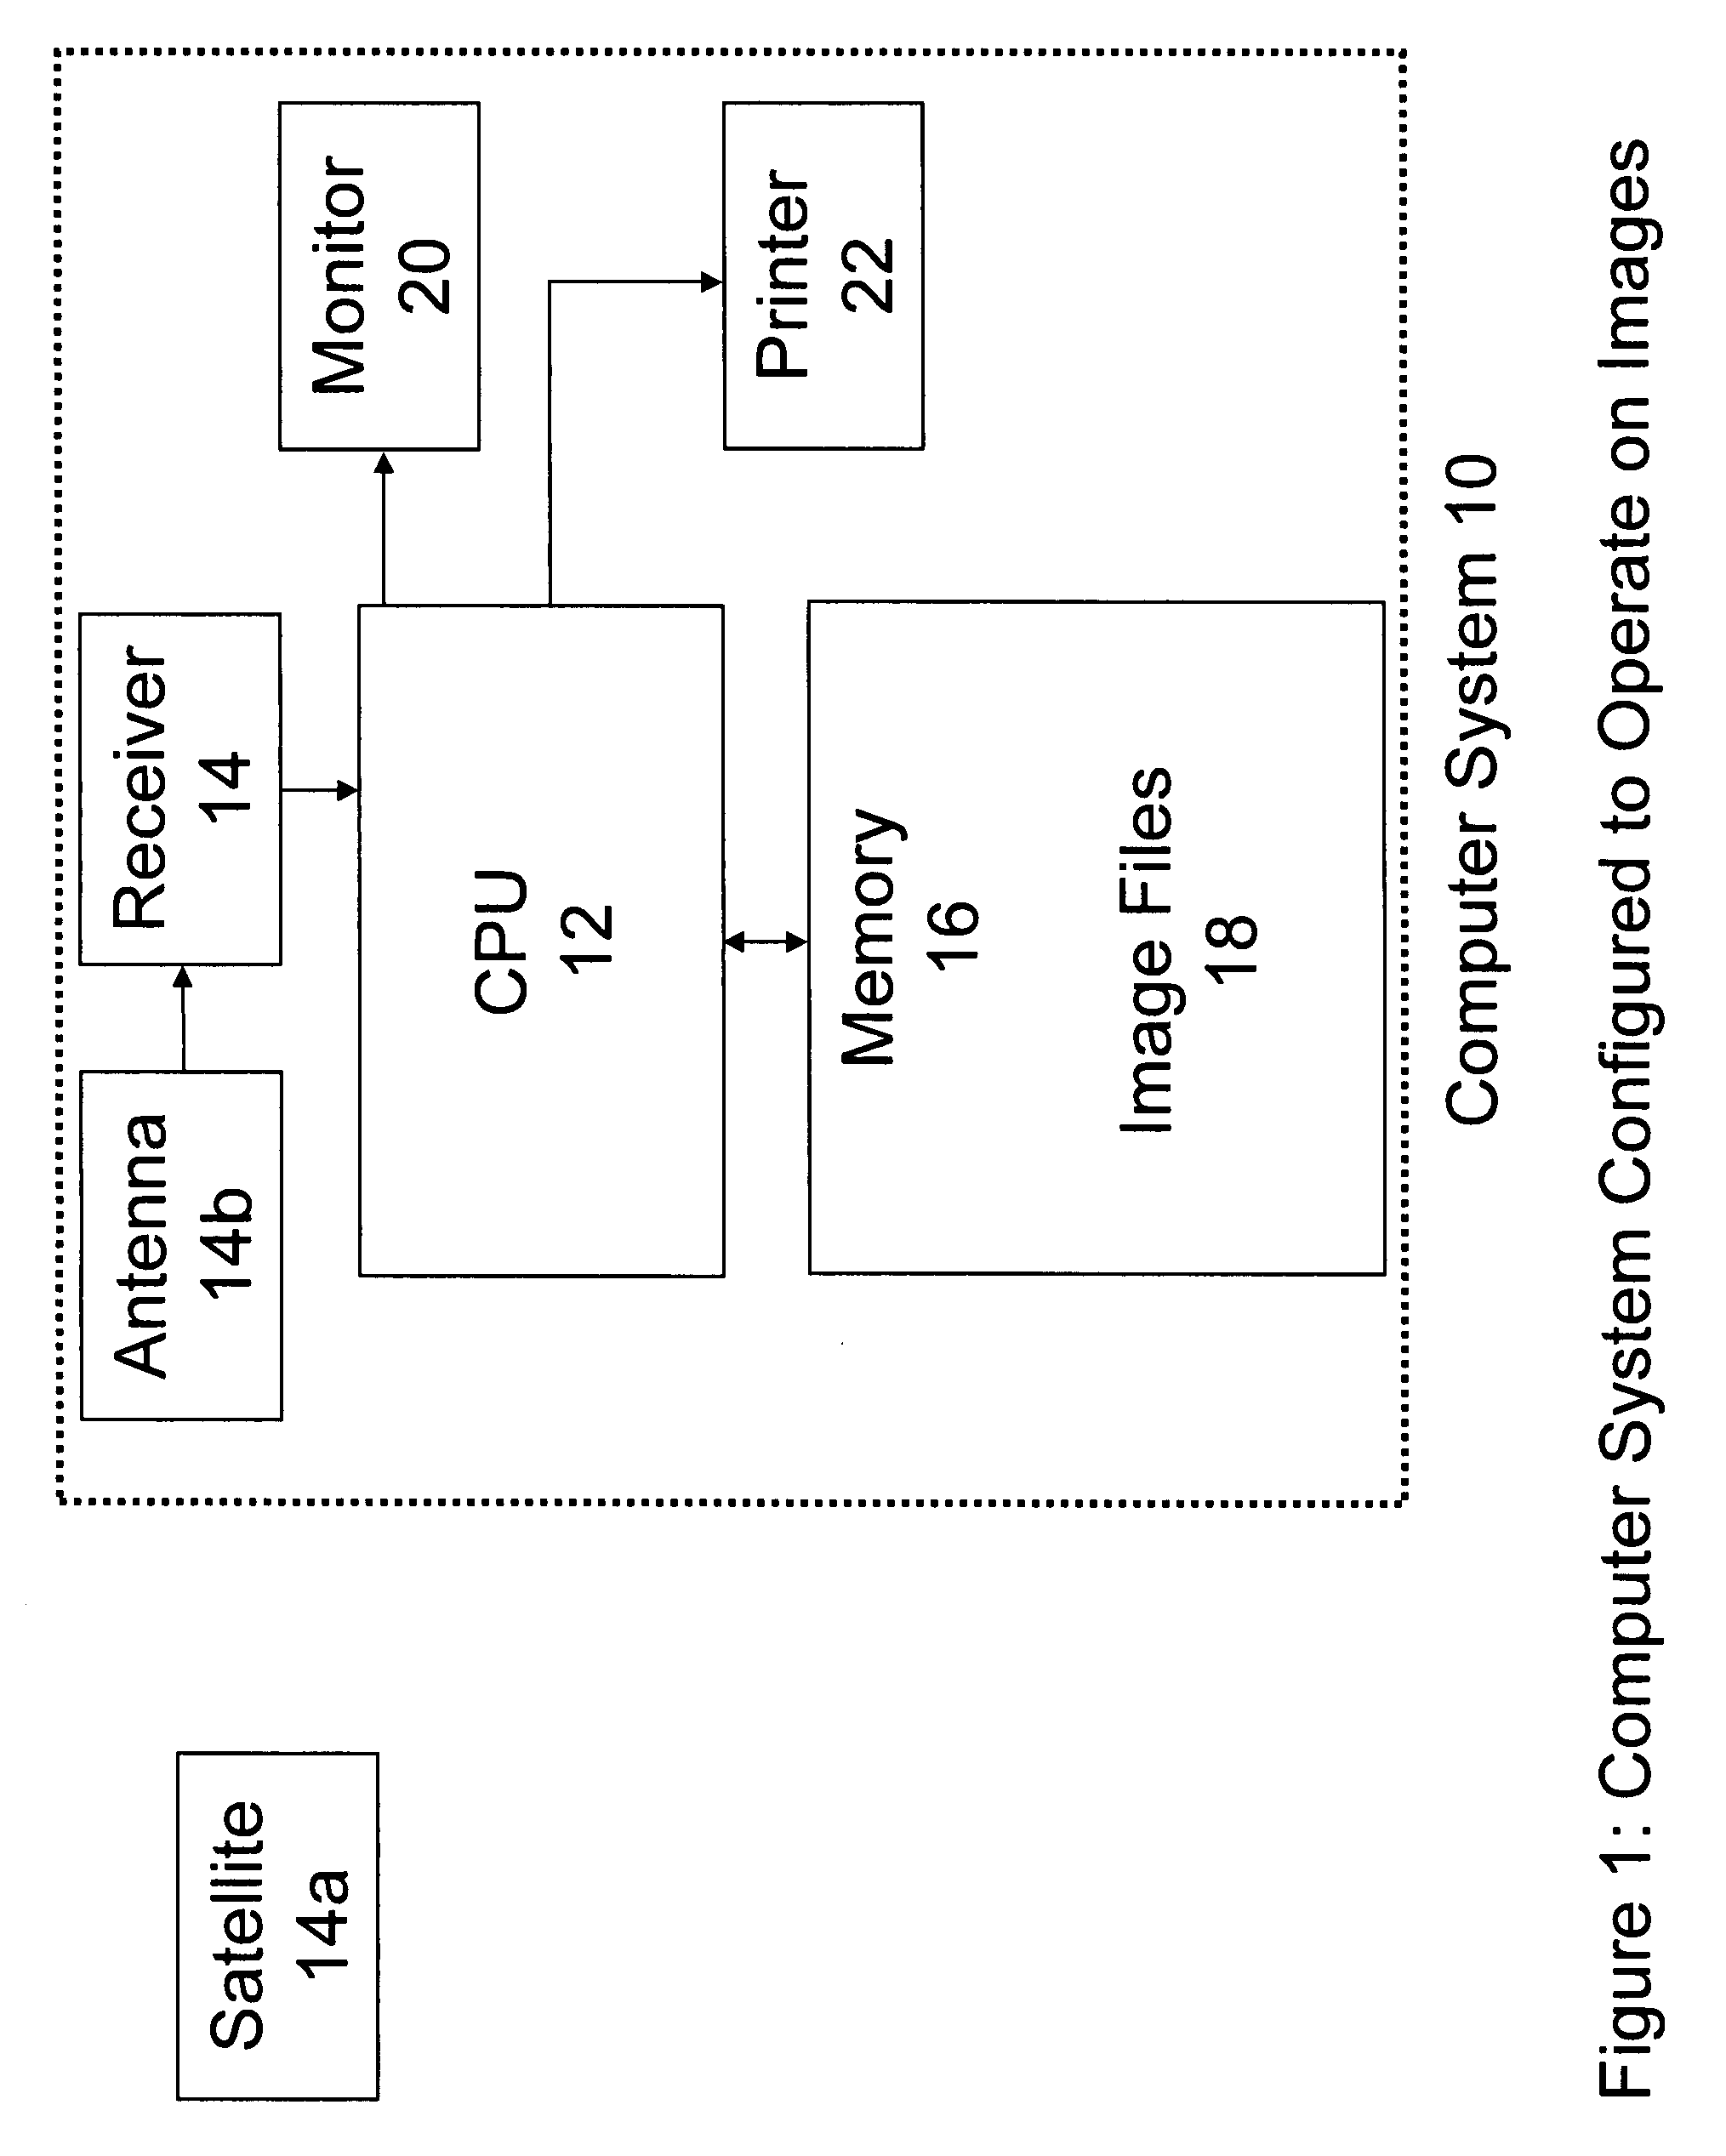 Method and system for improved detection of material reflectances in an image